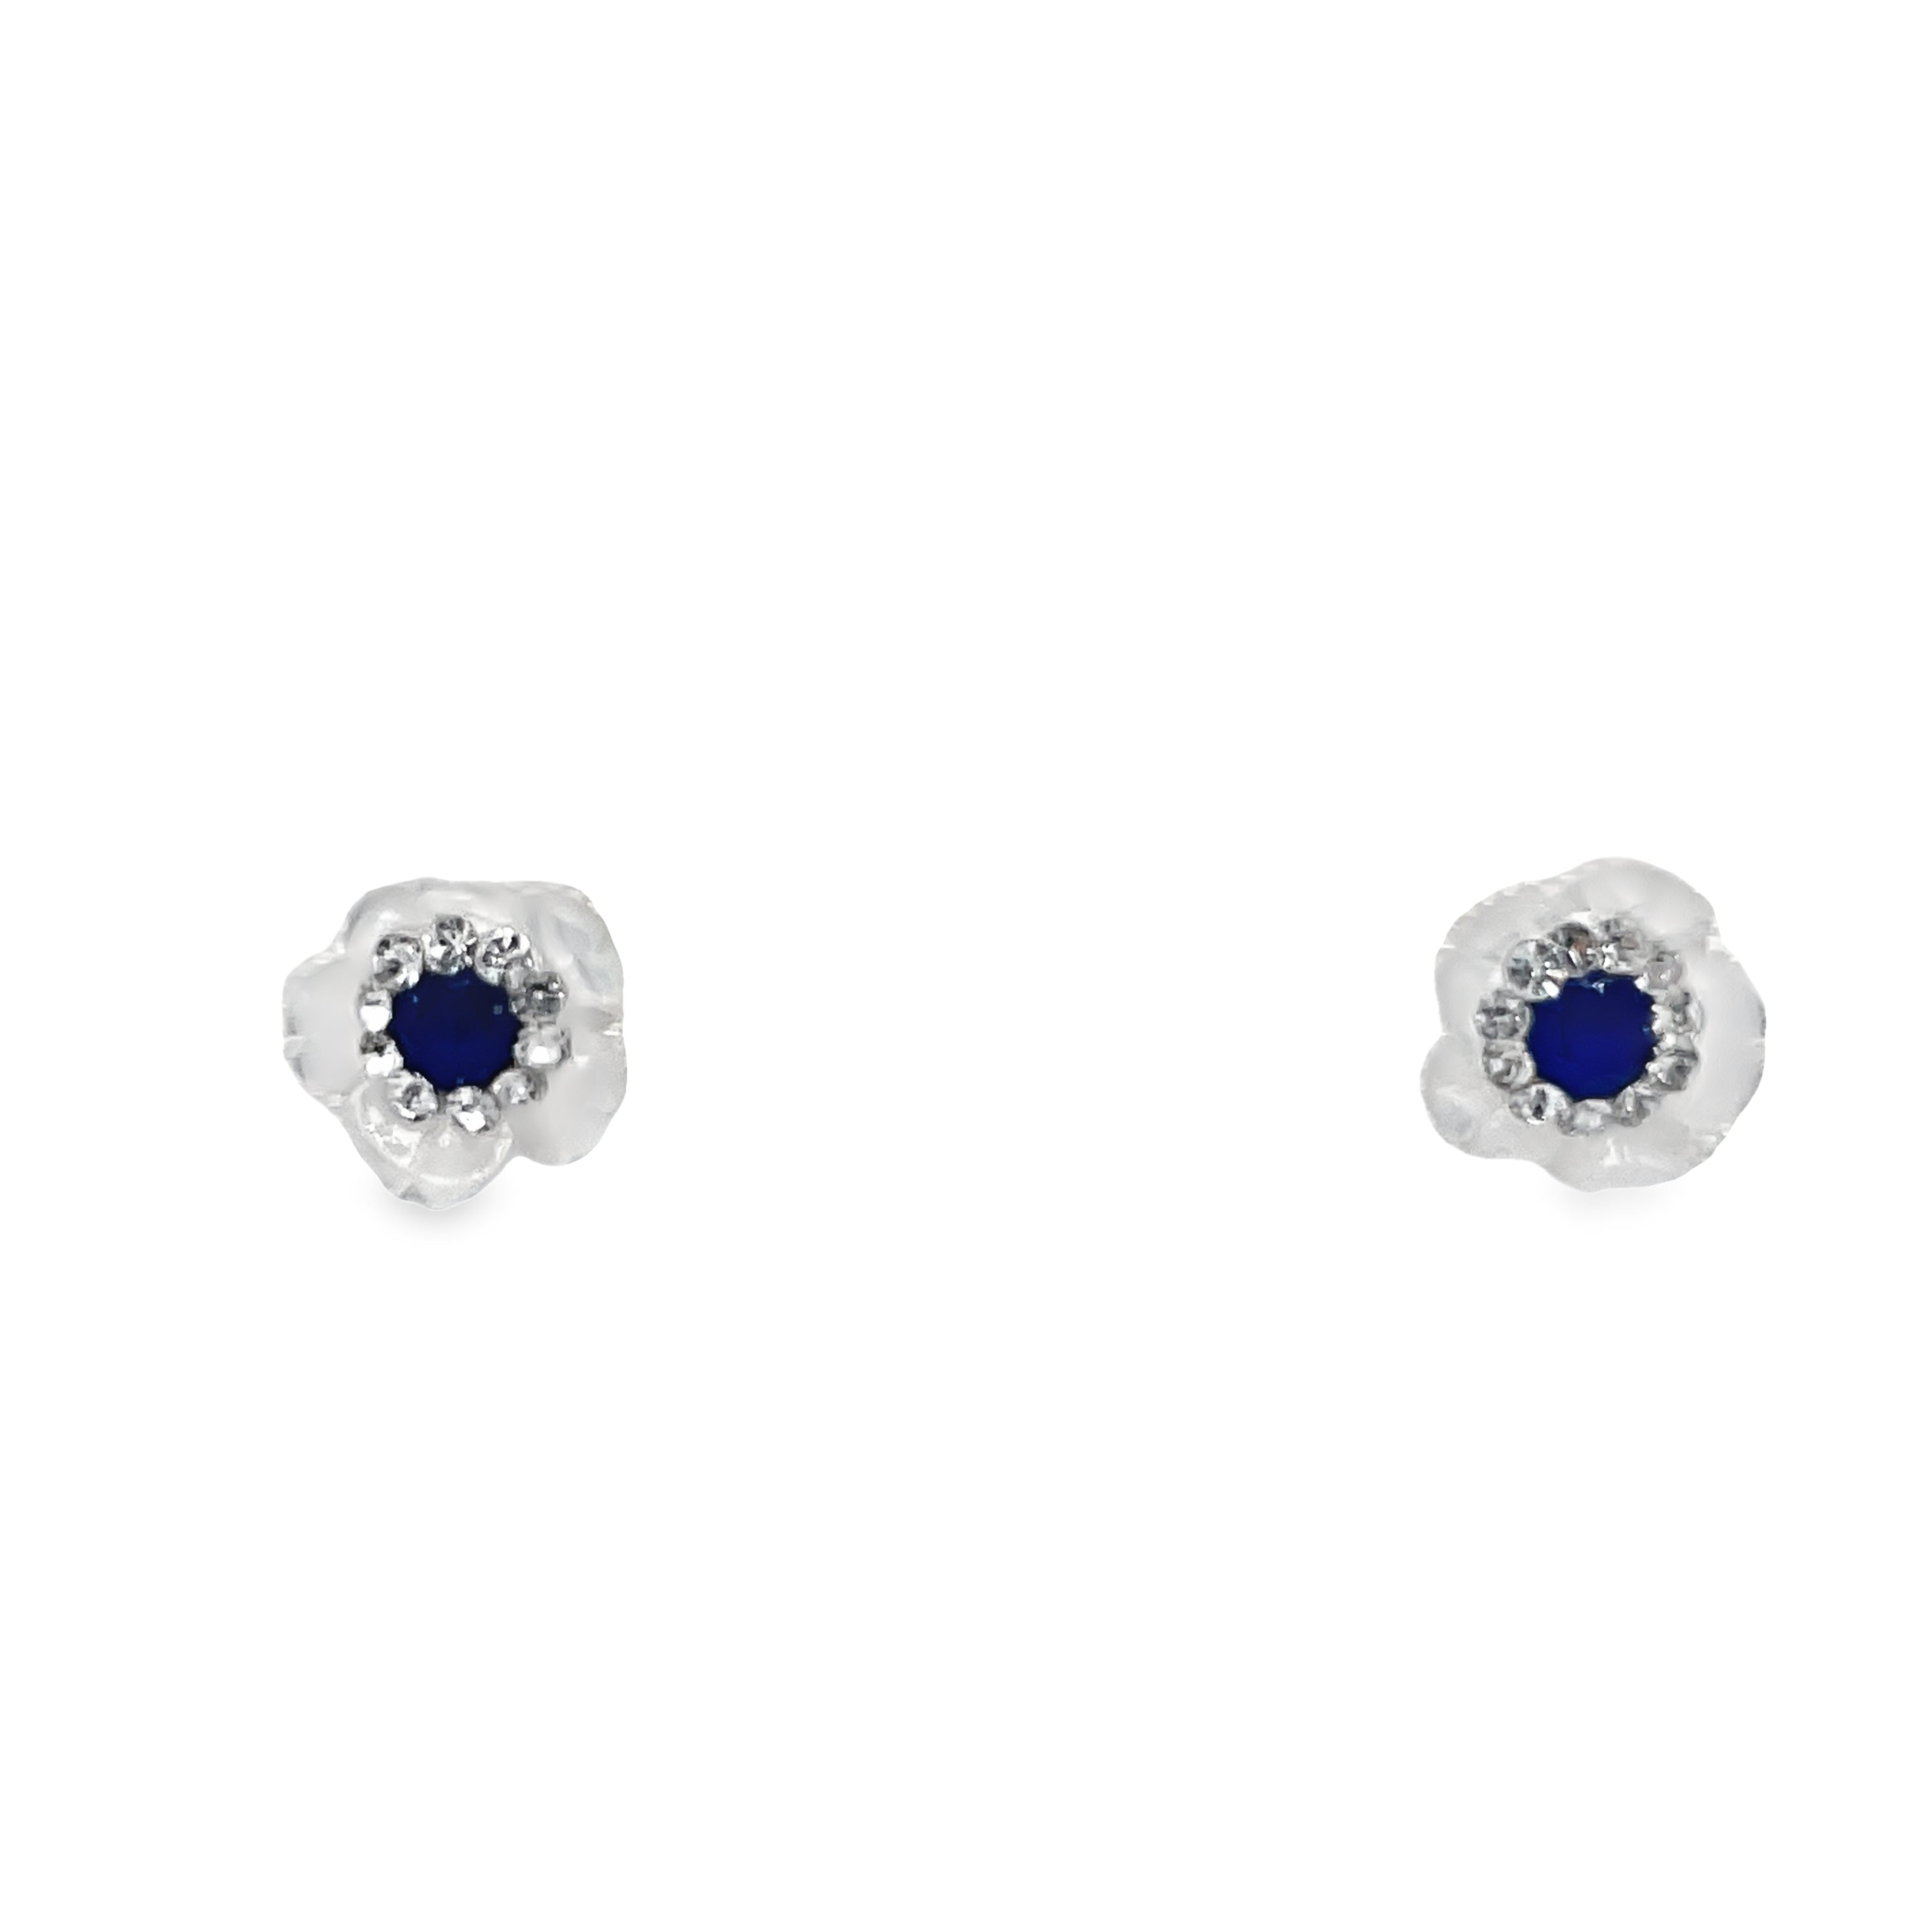 <p><span style="font-size: 0.875rem;">These exquisite flower earrings for babies feature 14k yellow gold construction with mother of pearl and sapphire securely affixed using baby screw backs.</span></p> <p>&nbsp;</p>